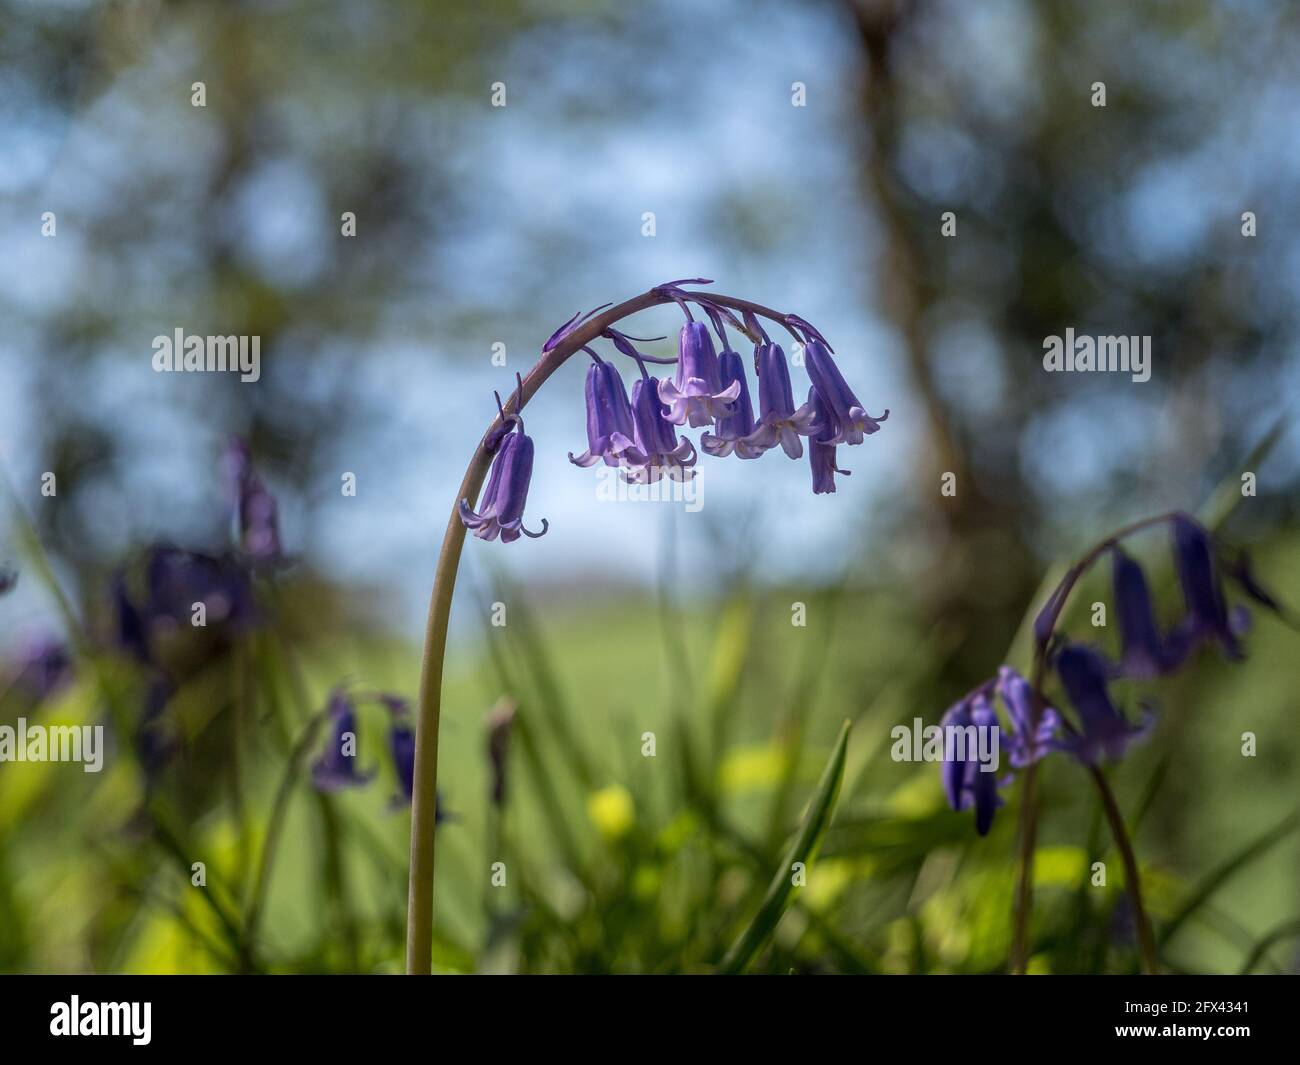 a Single stem of English Bluebells curving hanging shape silhouette echo eiyh backlit bokeh background of sky and trees with grass in foreground Stock Photo